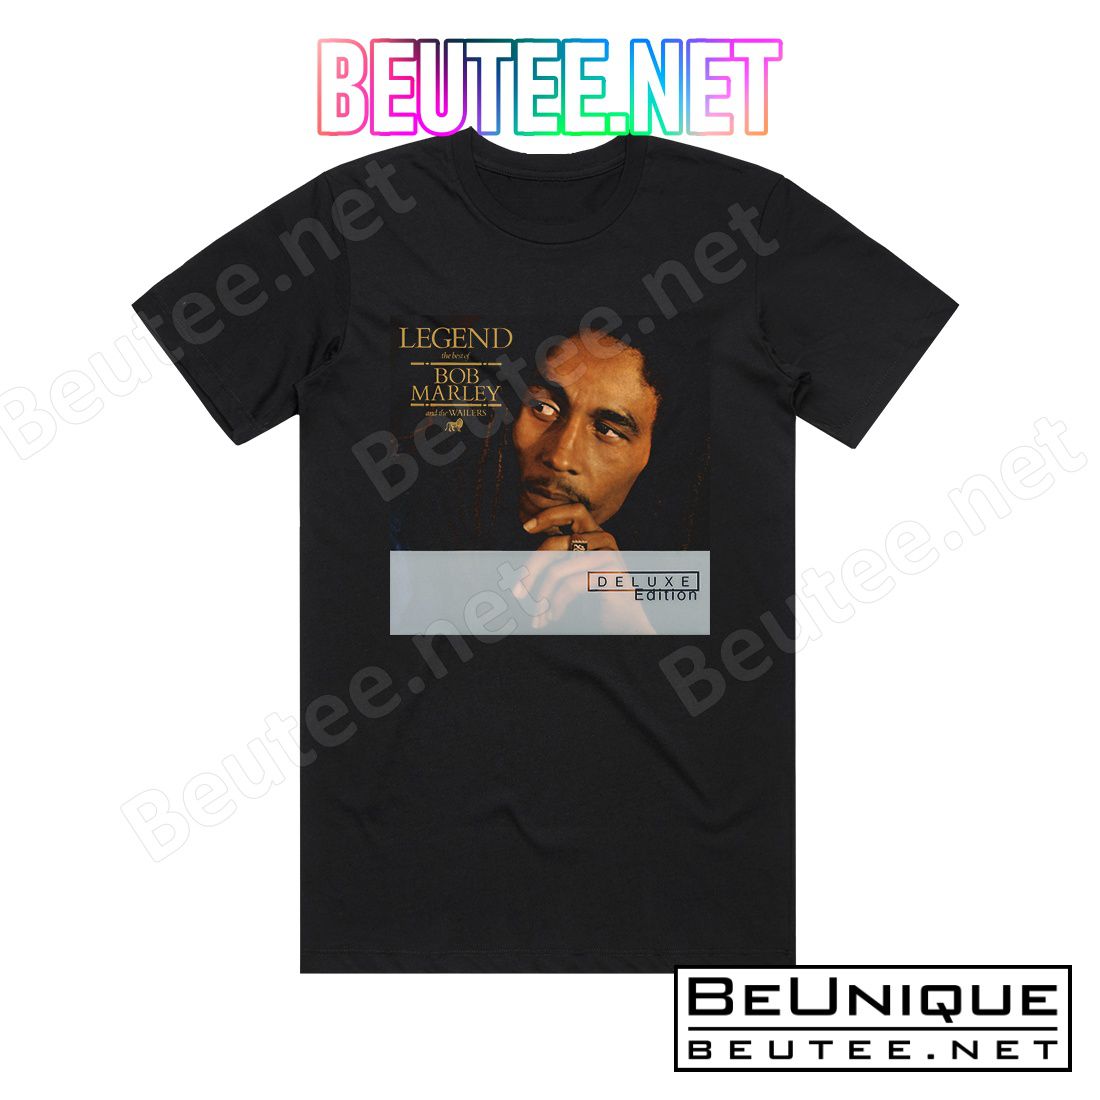 Bob Marley and The Wailers Legend The Best Of Bob Marley And The Wailers 2 Album Cover T-Shirt